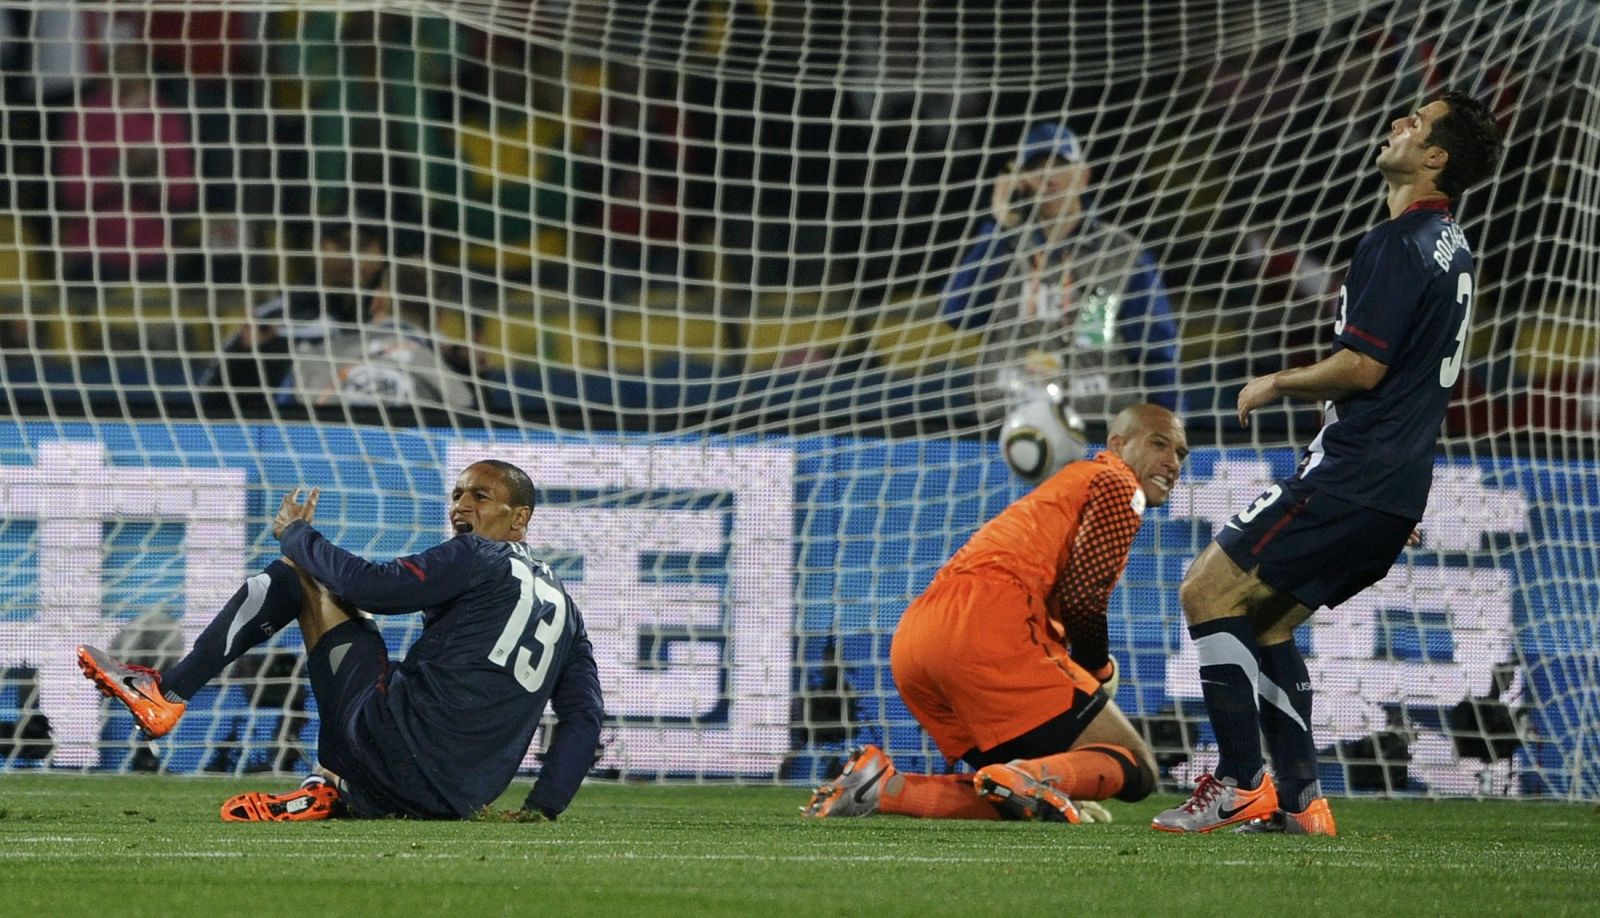 Clark, Howard and Bocanegra of the US react after conceding goal by England's Gerrard during the 2010 World Cup Group C soccer match in Rustenburg